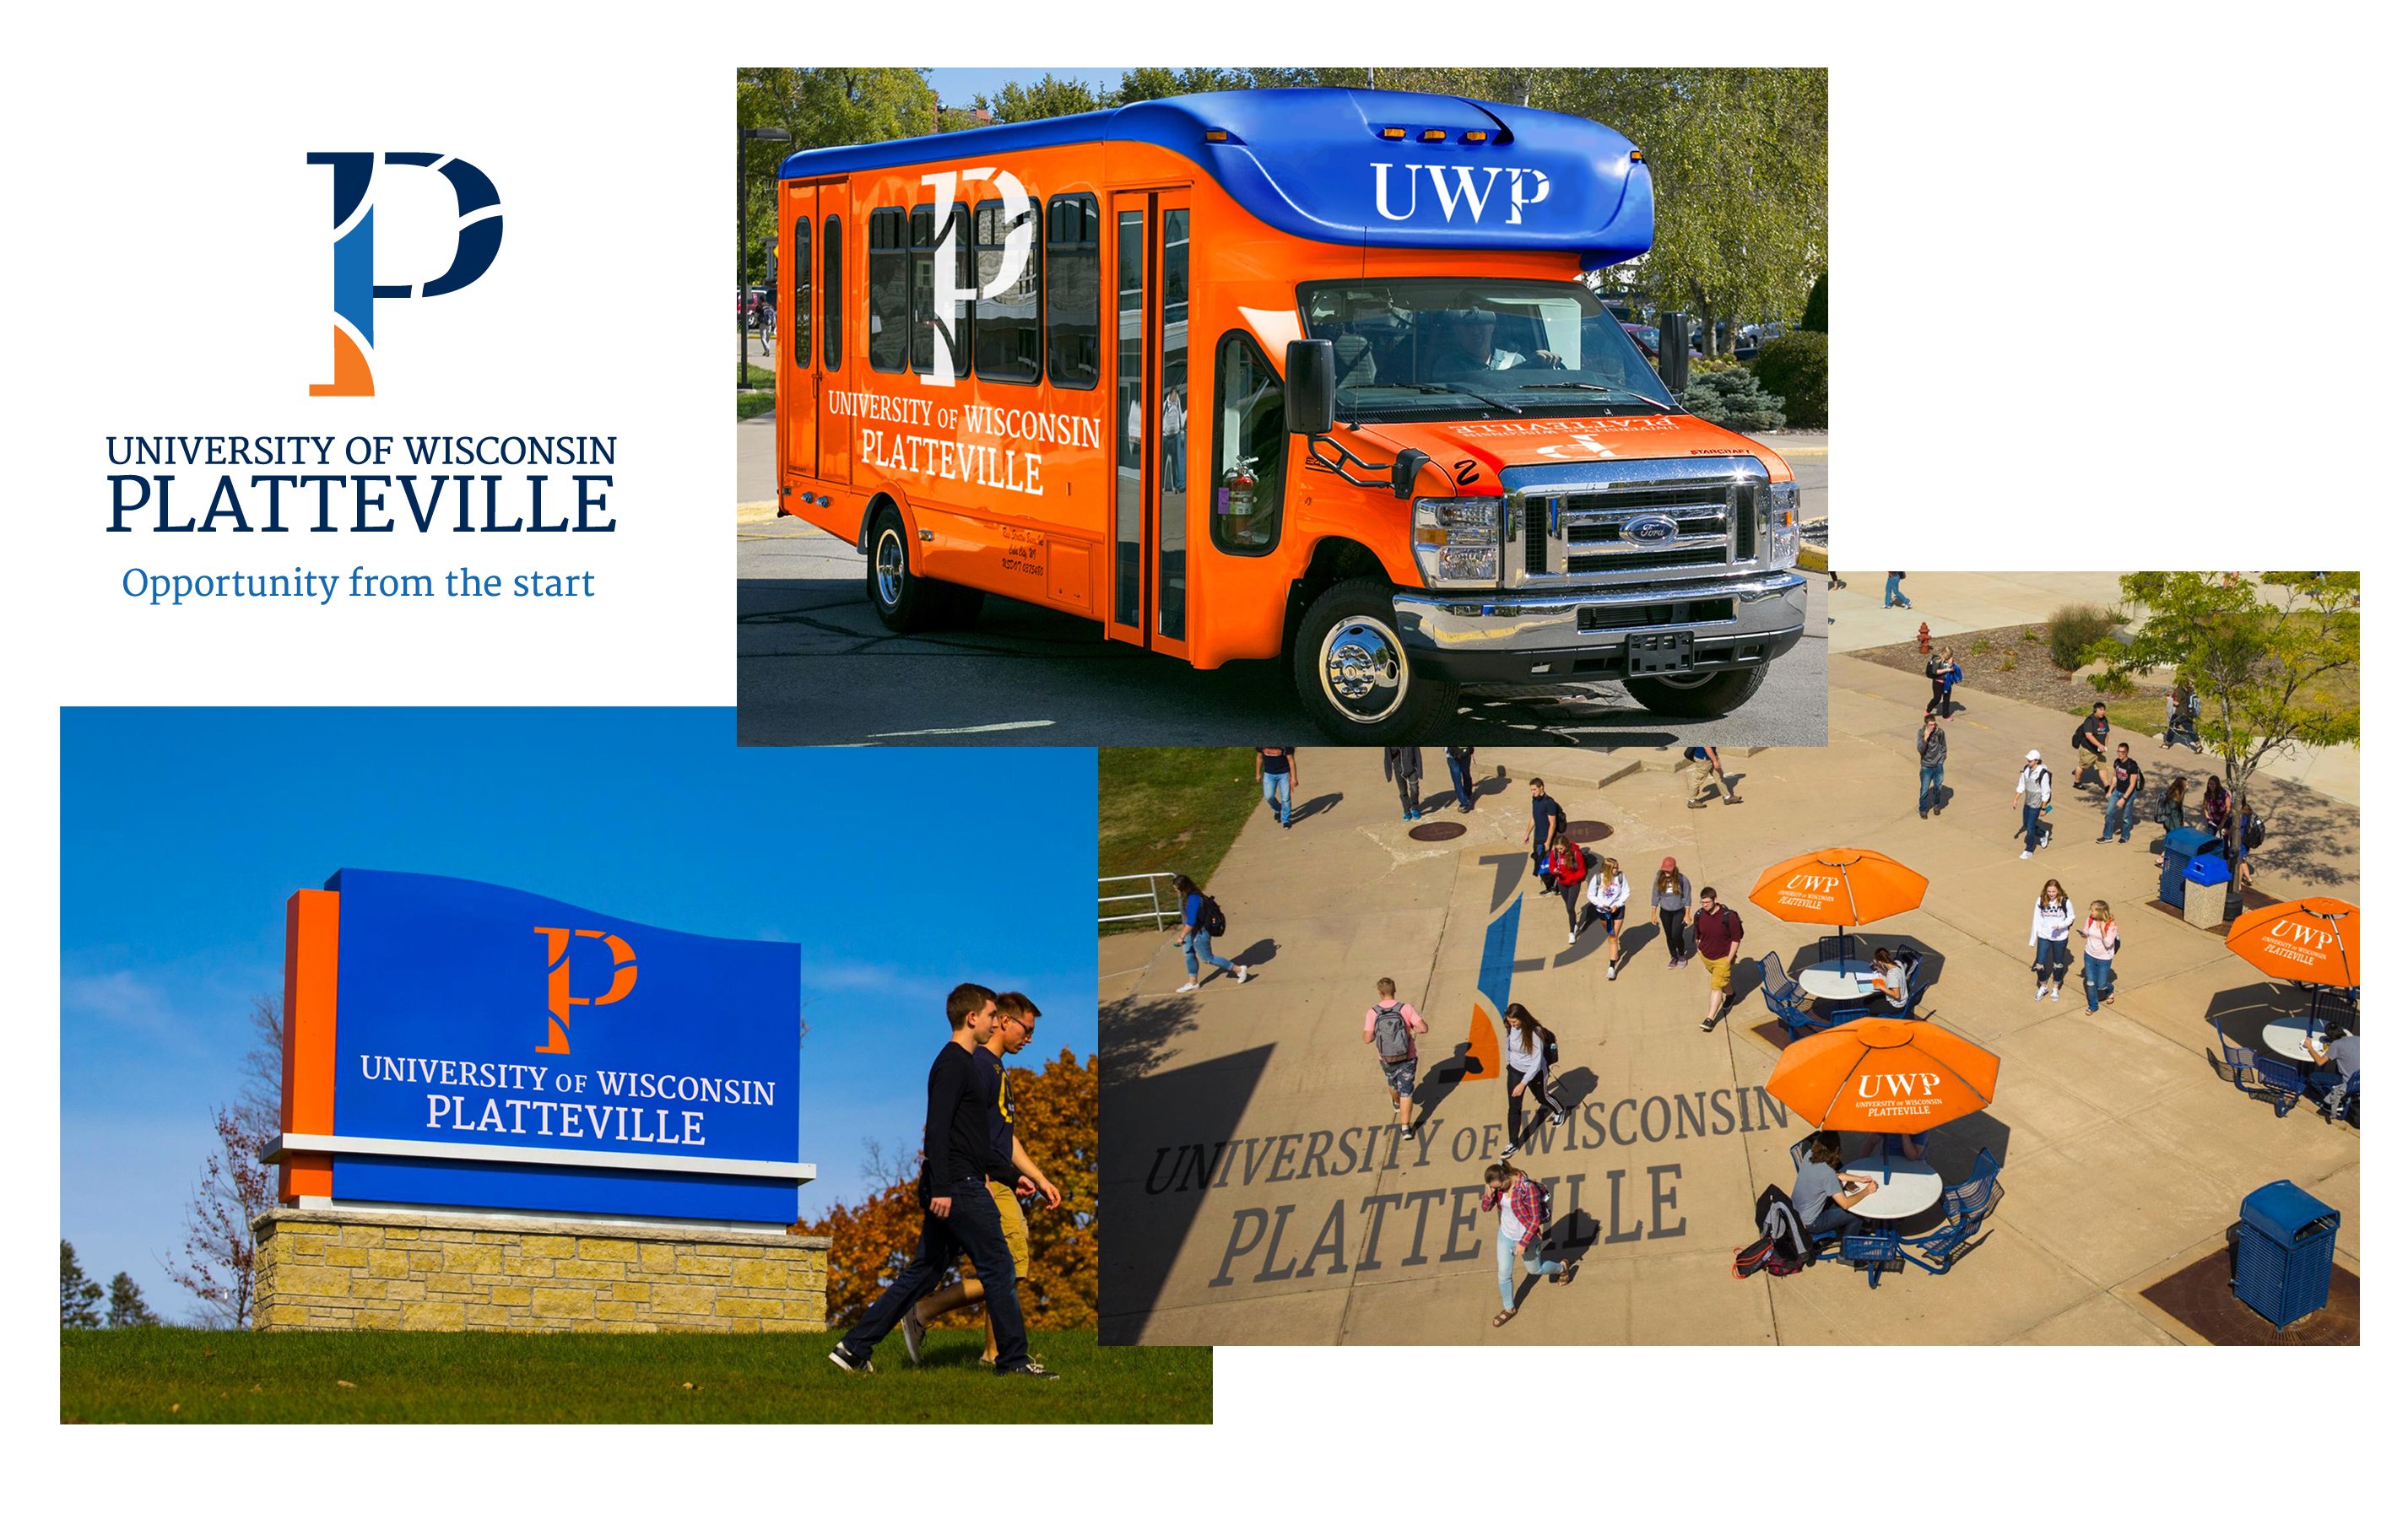 Bus wrap, campus signage and sample campus logo placement based on UW-Platteville’s new brand created by Vendi